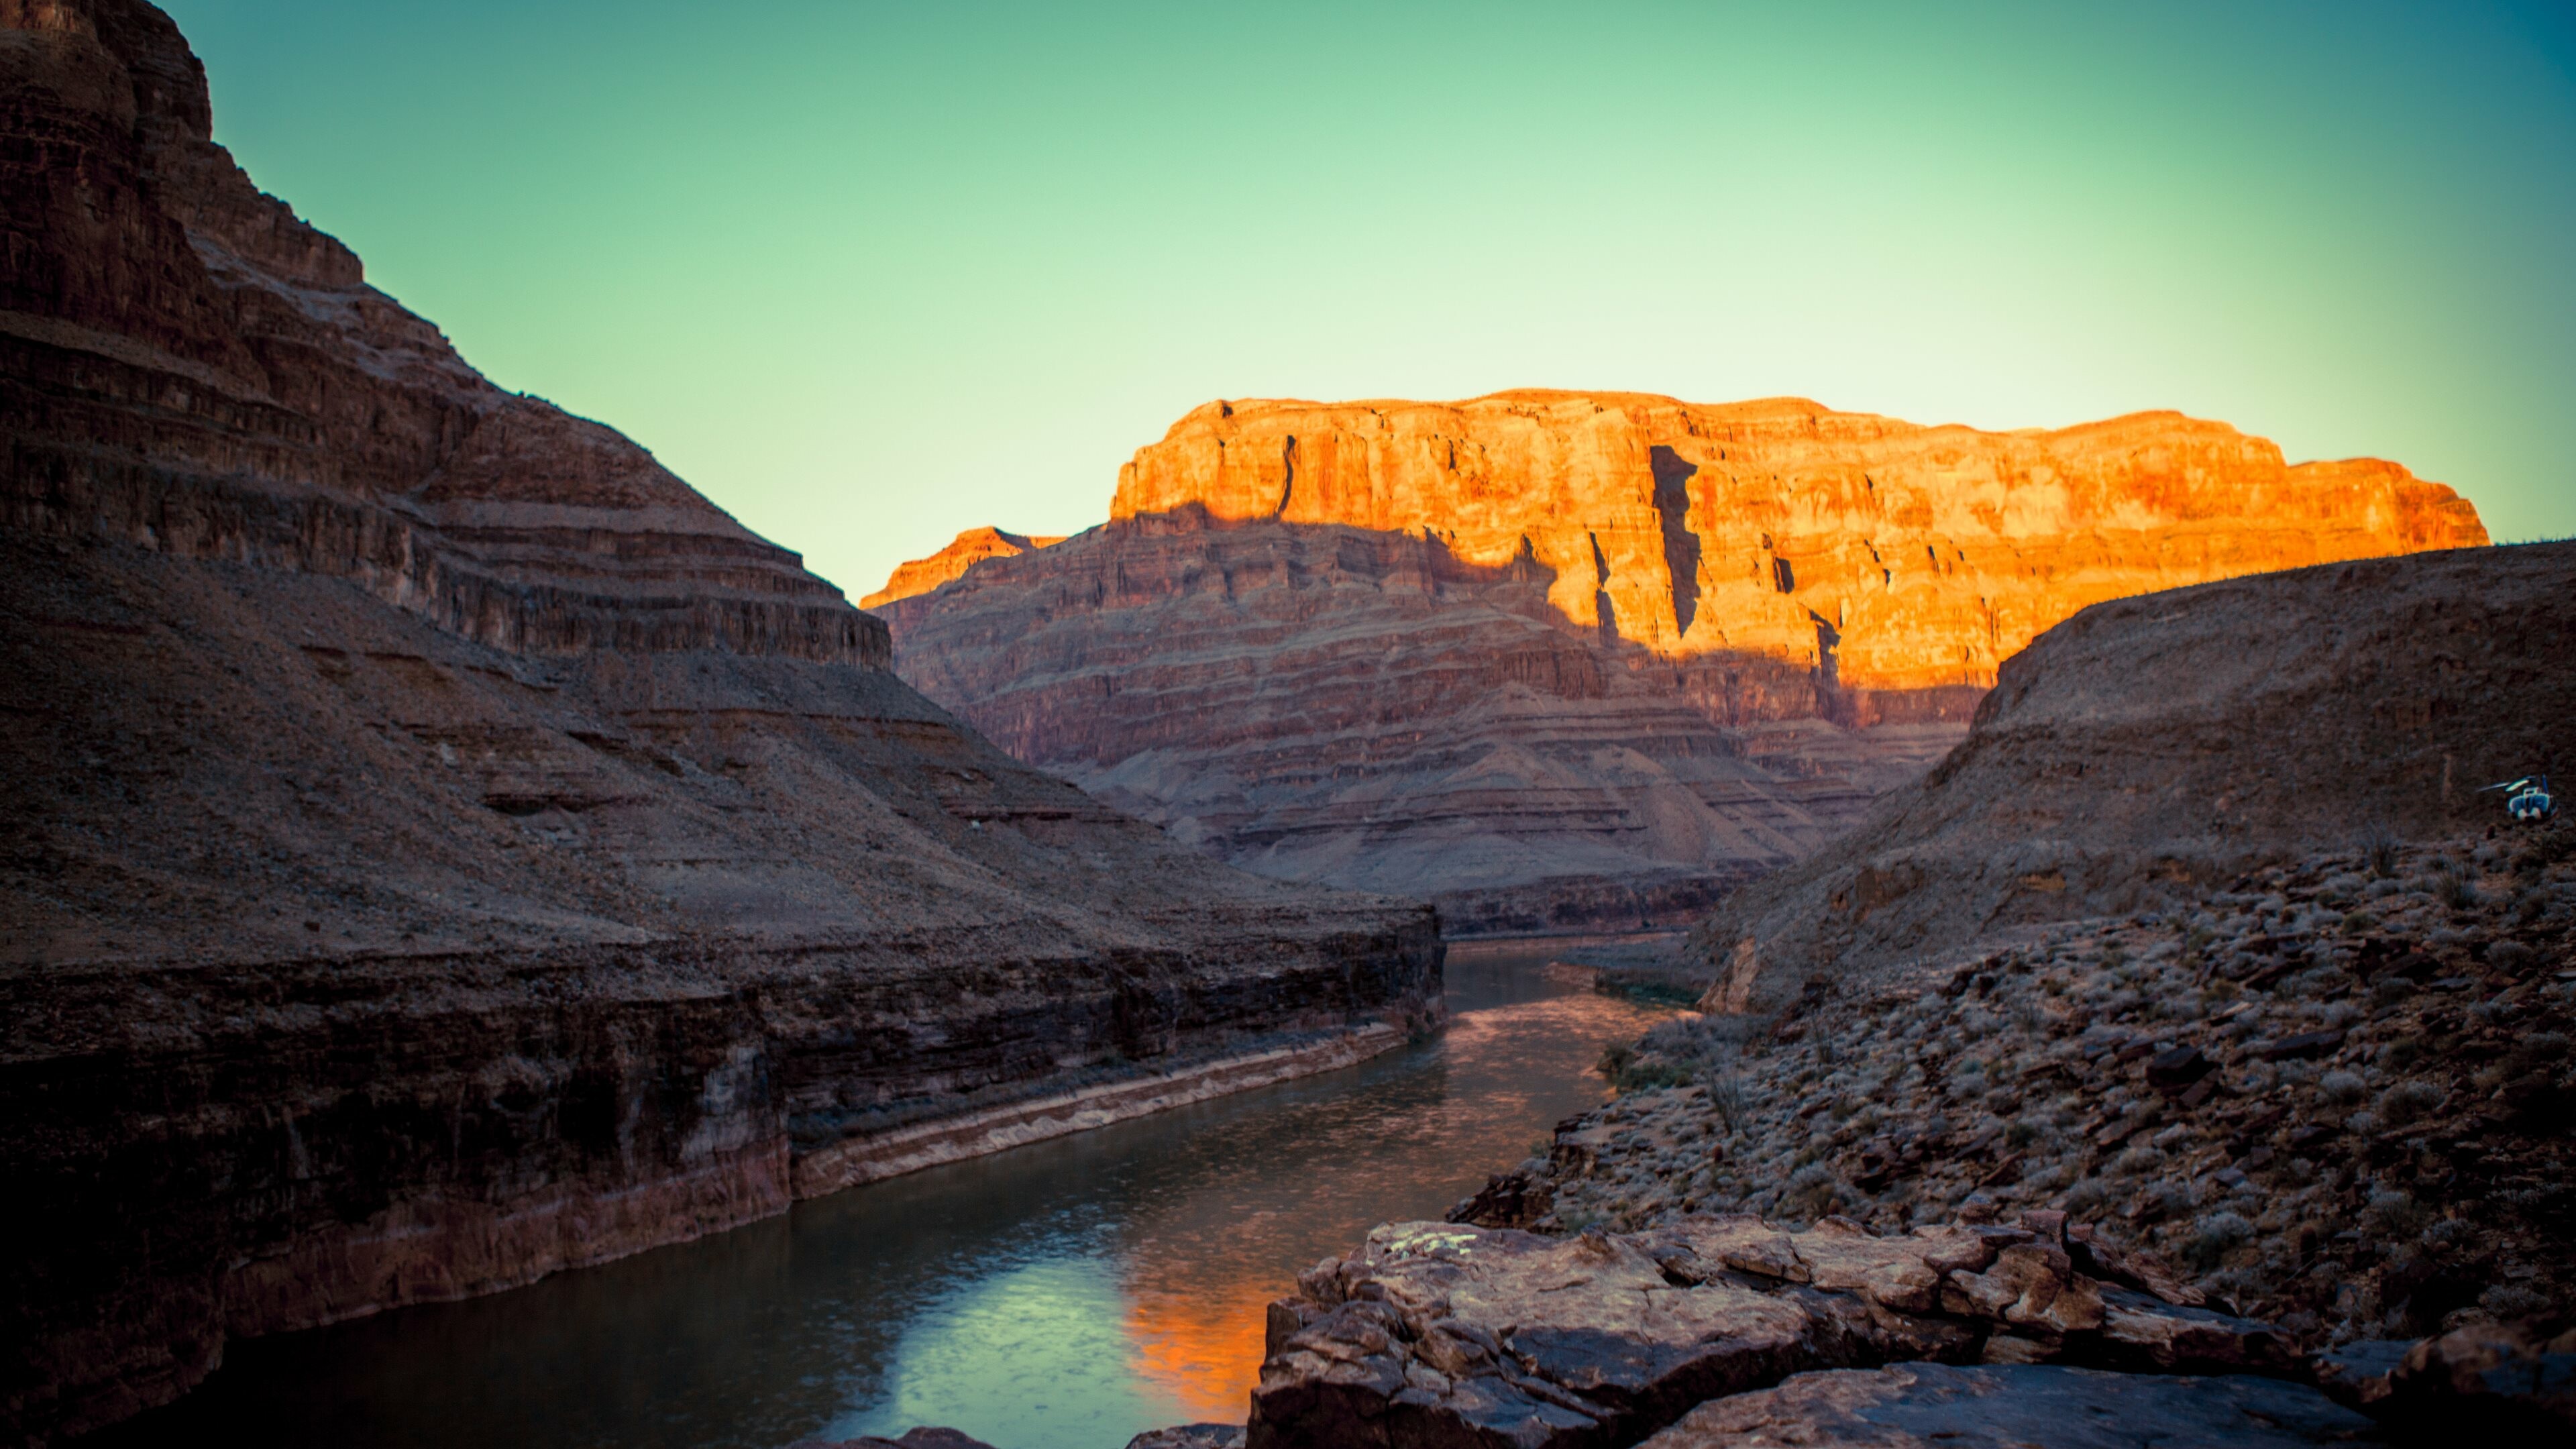 Grand Canyon: The most spectacular gorge in the world, Carved out by the Colorado River. 3840x2160 4K Background.